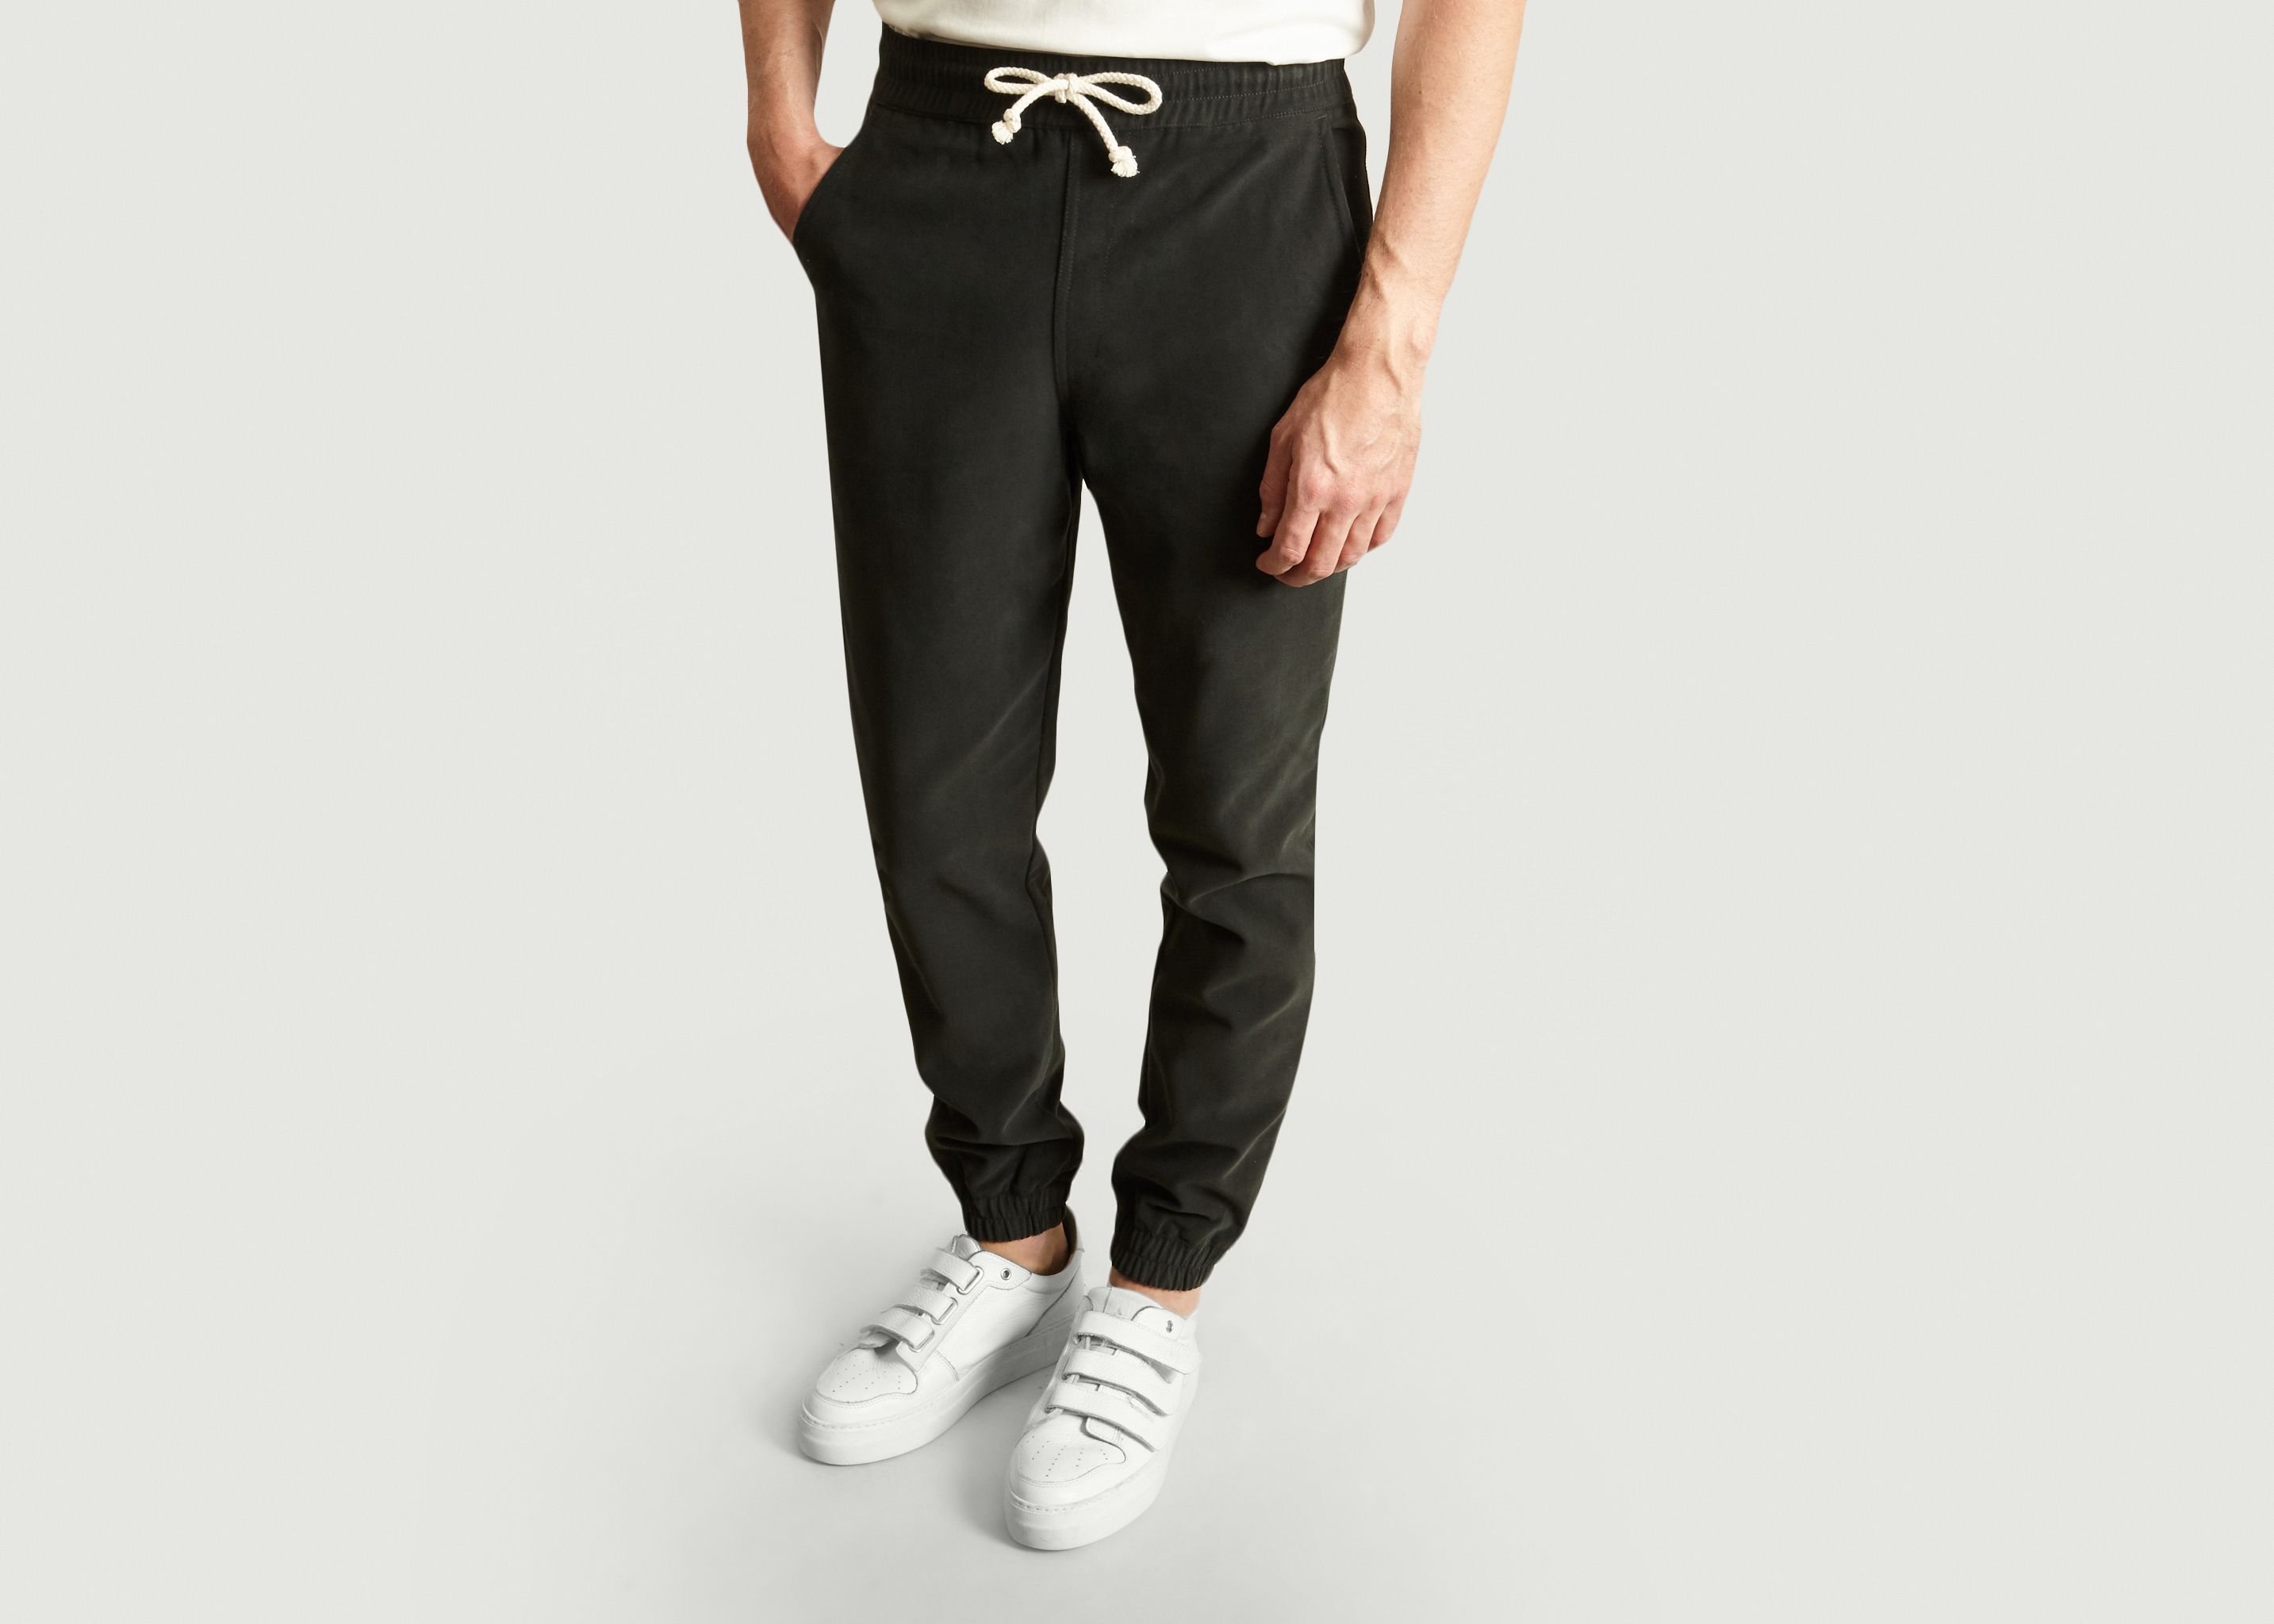 Traveller Pants - Olow